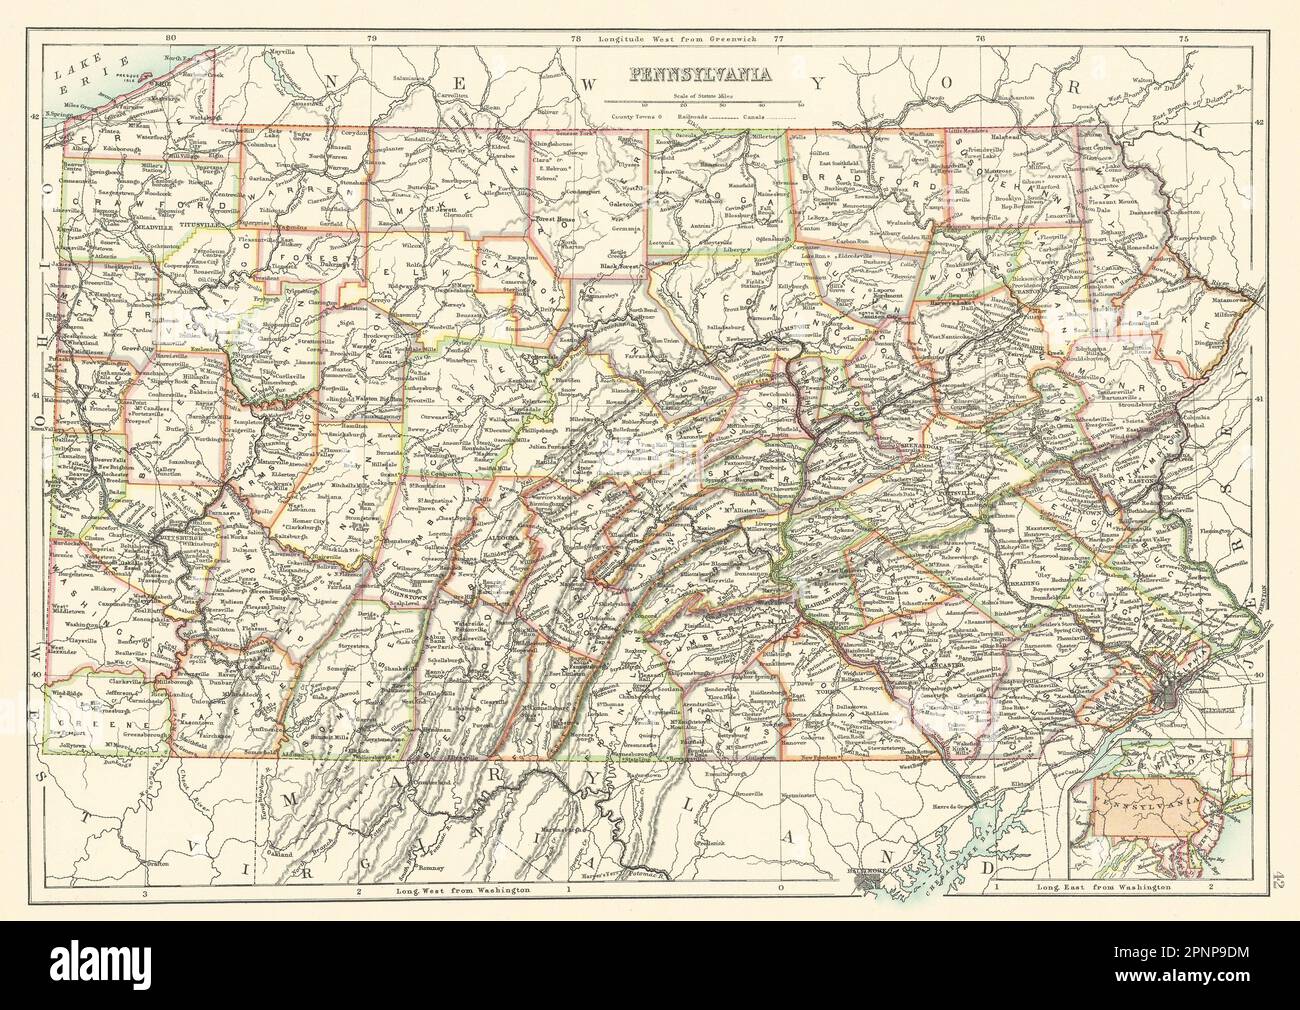 Pennsylvania state map showing counties. BARTHOLOMEW 1898 old antique Stock Photo